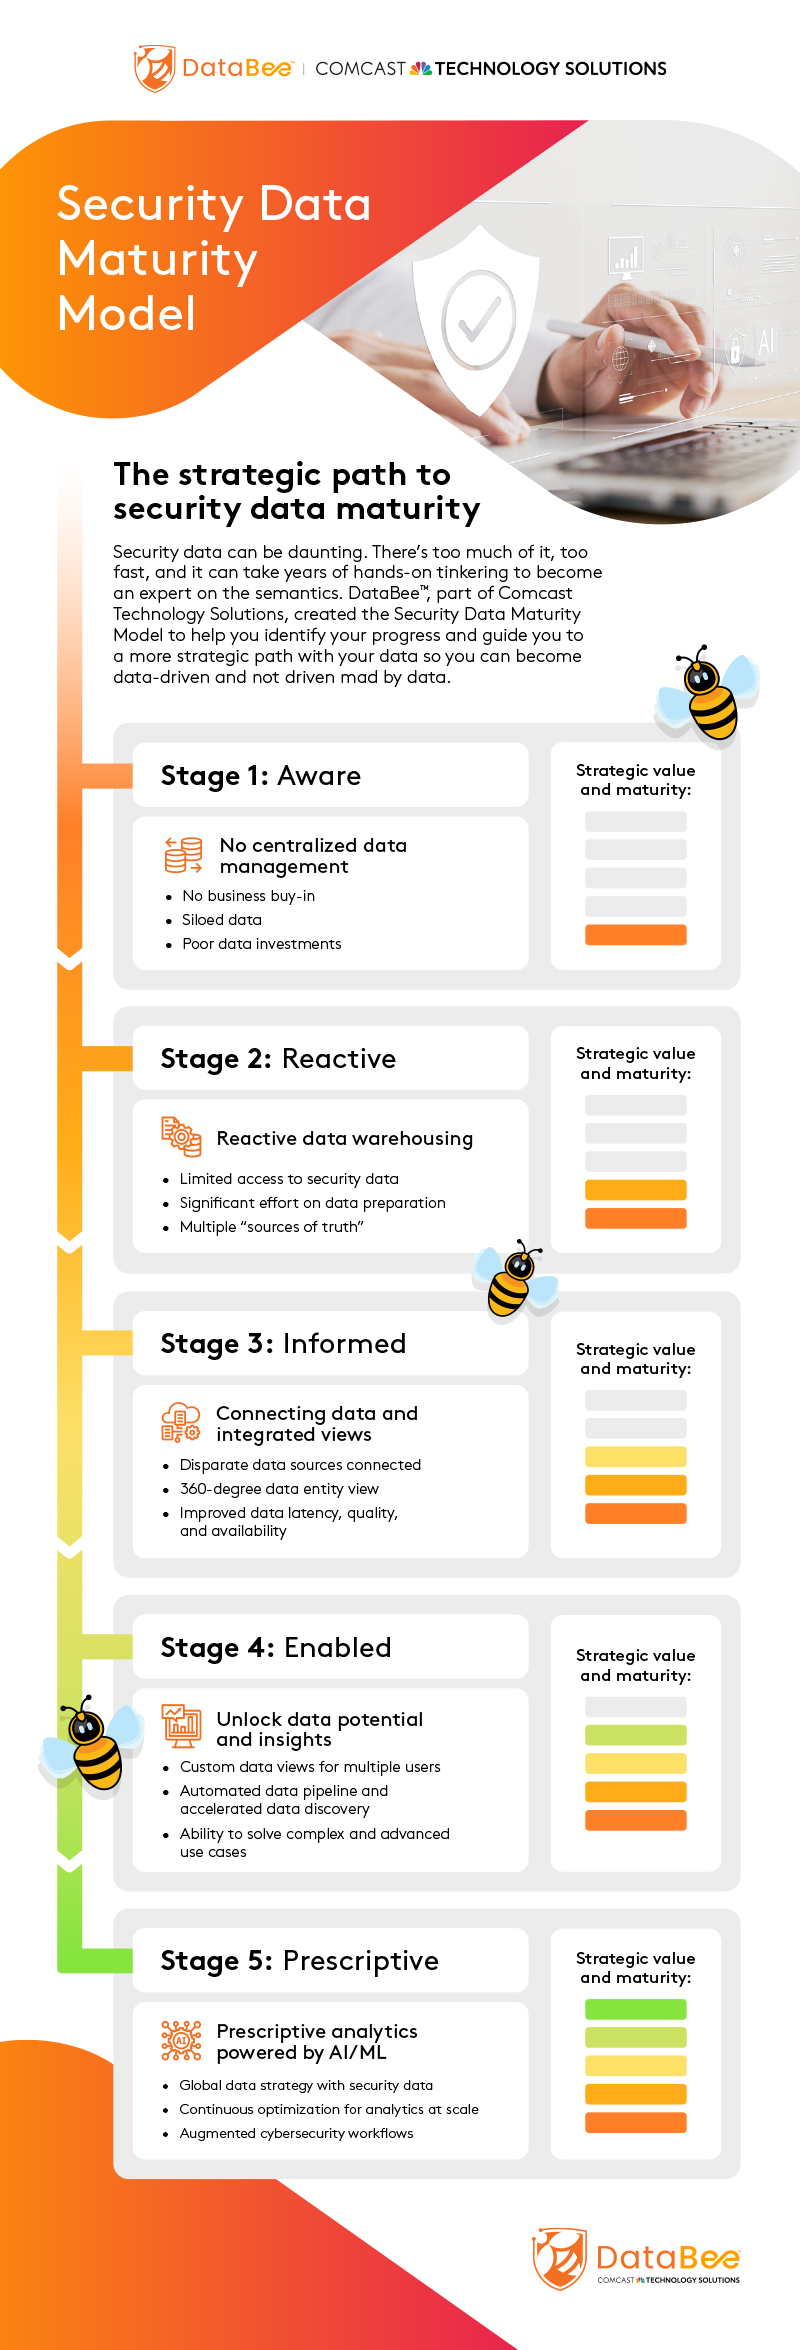 Security Data Maturity Model infographic